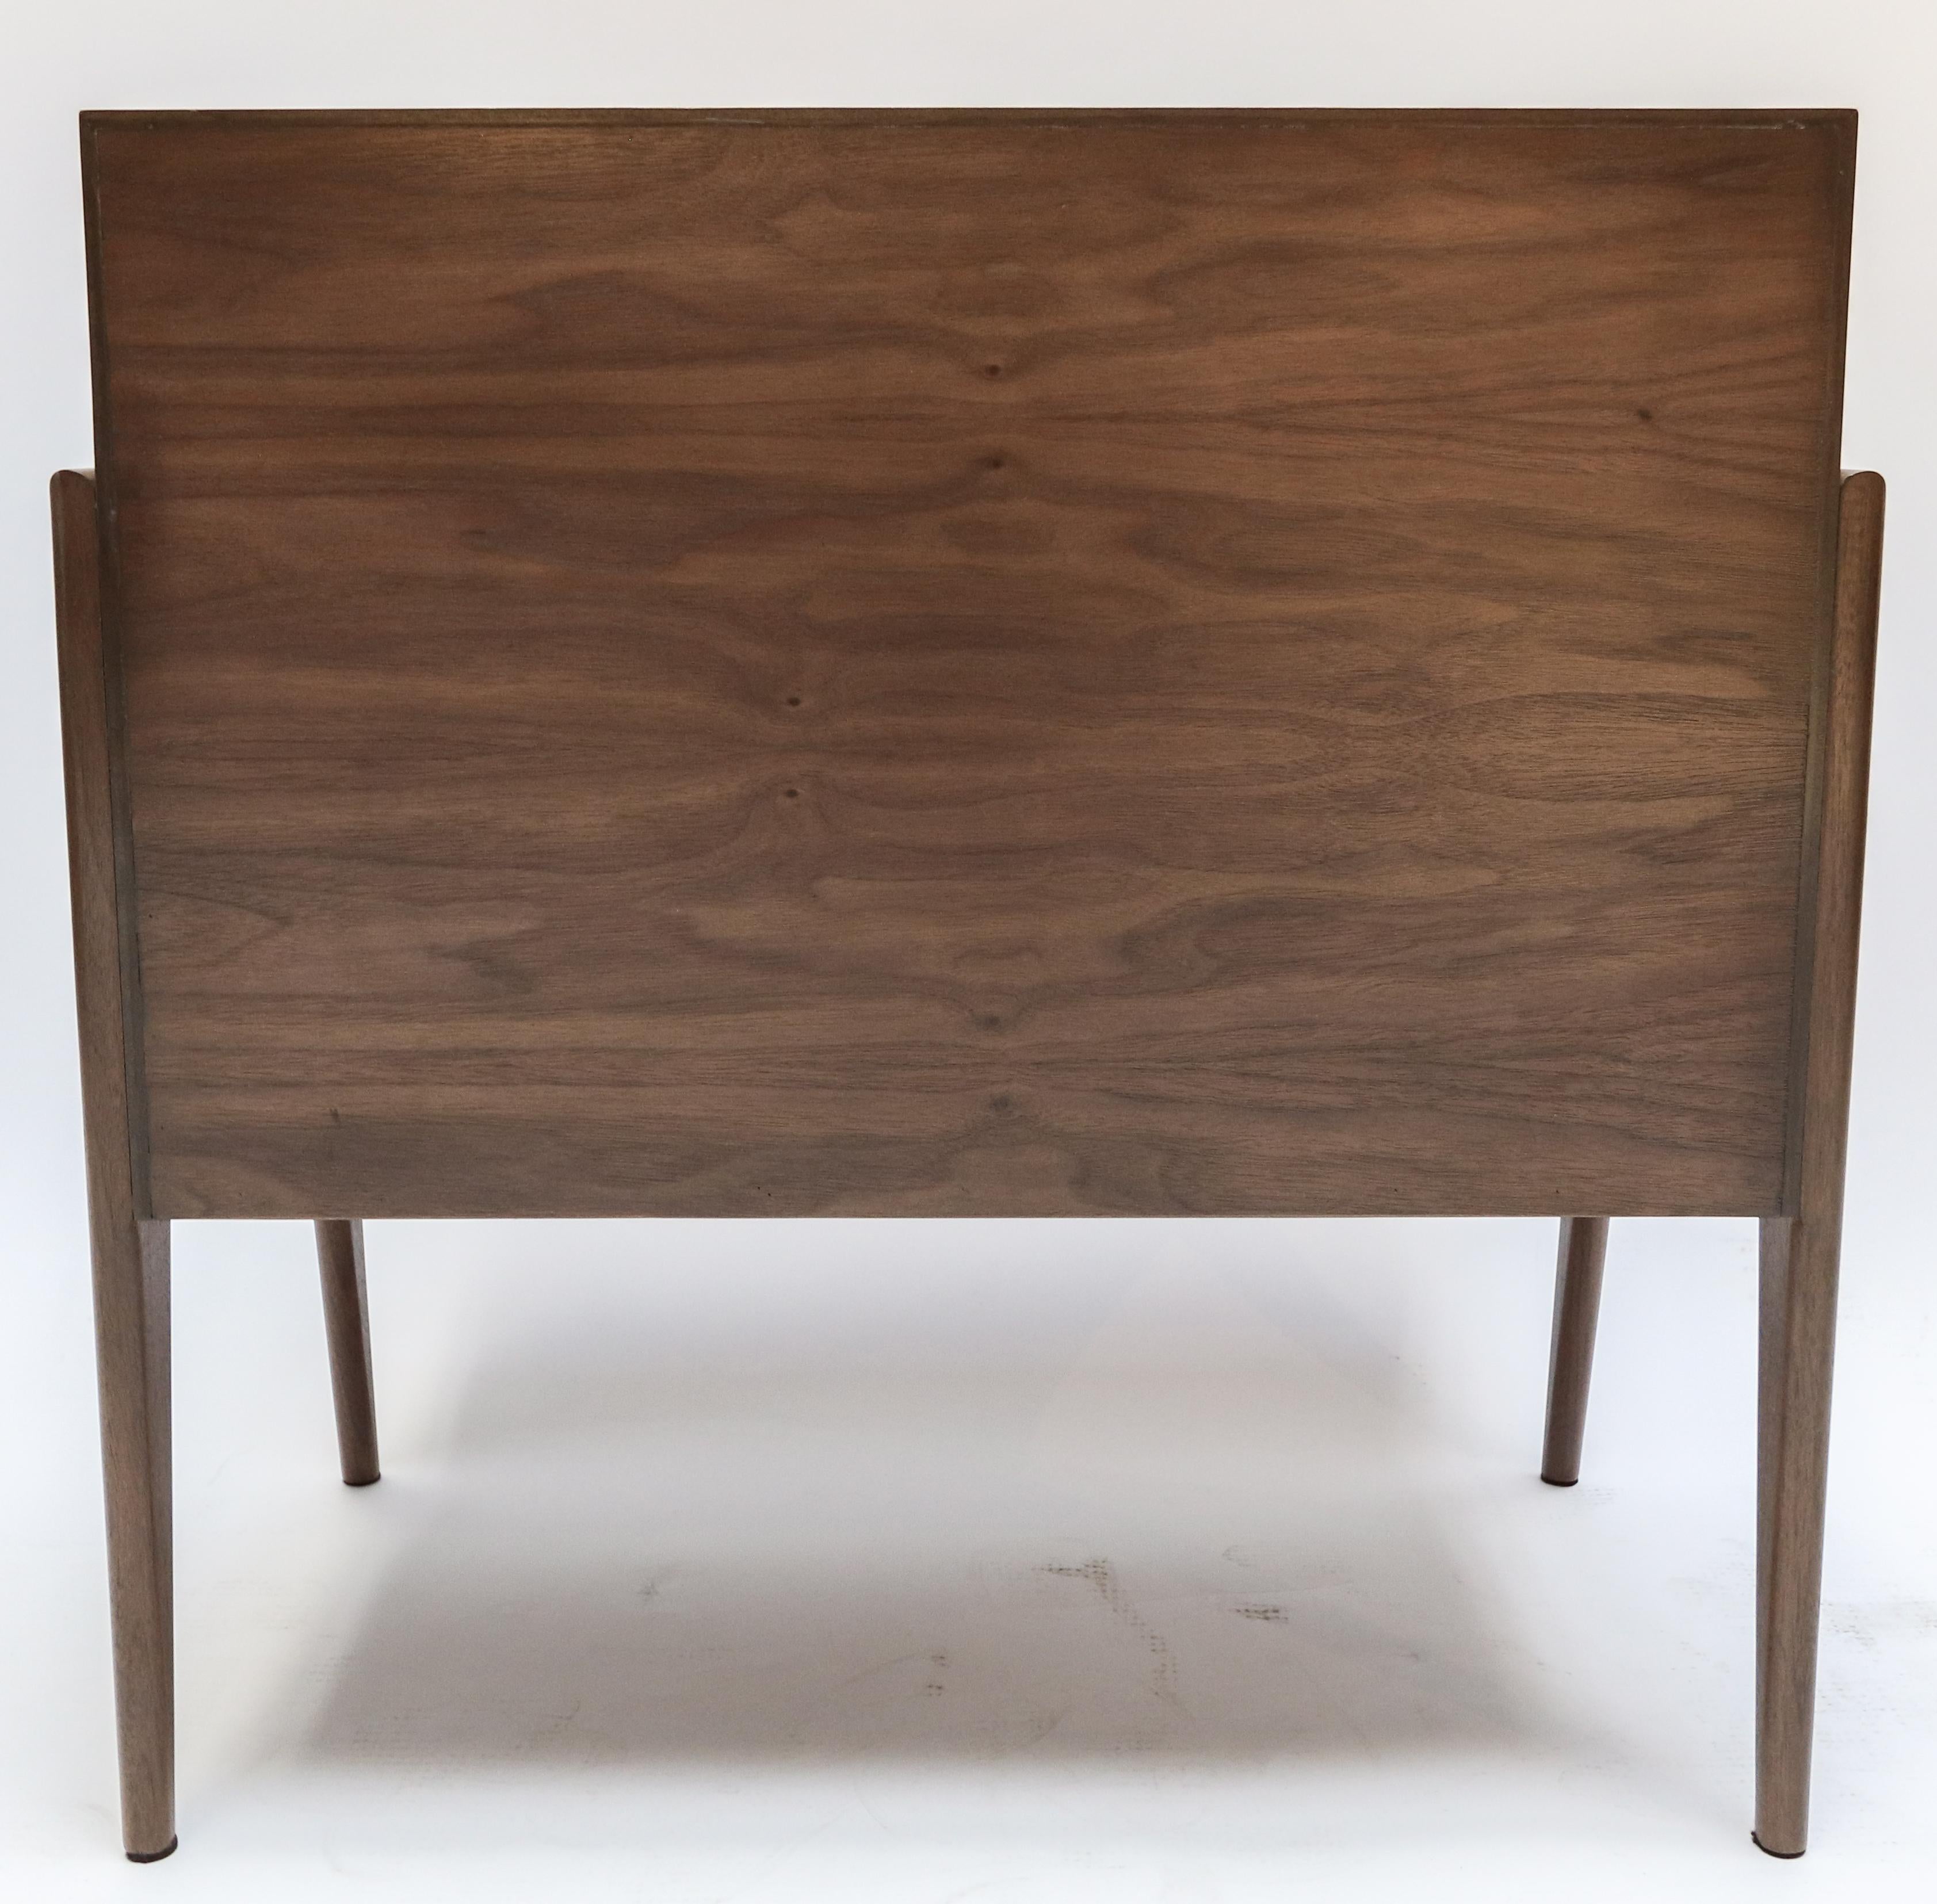 Custom Midcentury Style Walnut Nightstands with Three Drawers by Adesso Imports For Sale 3